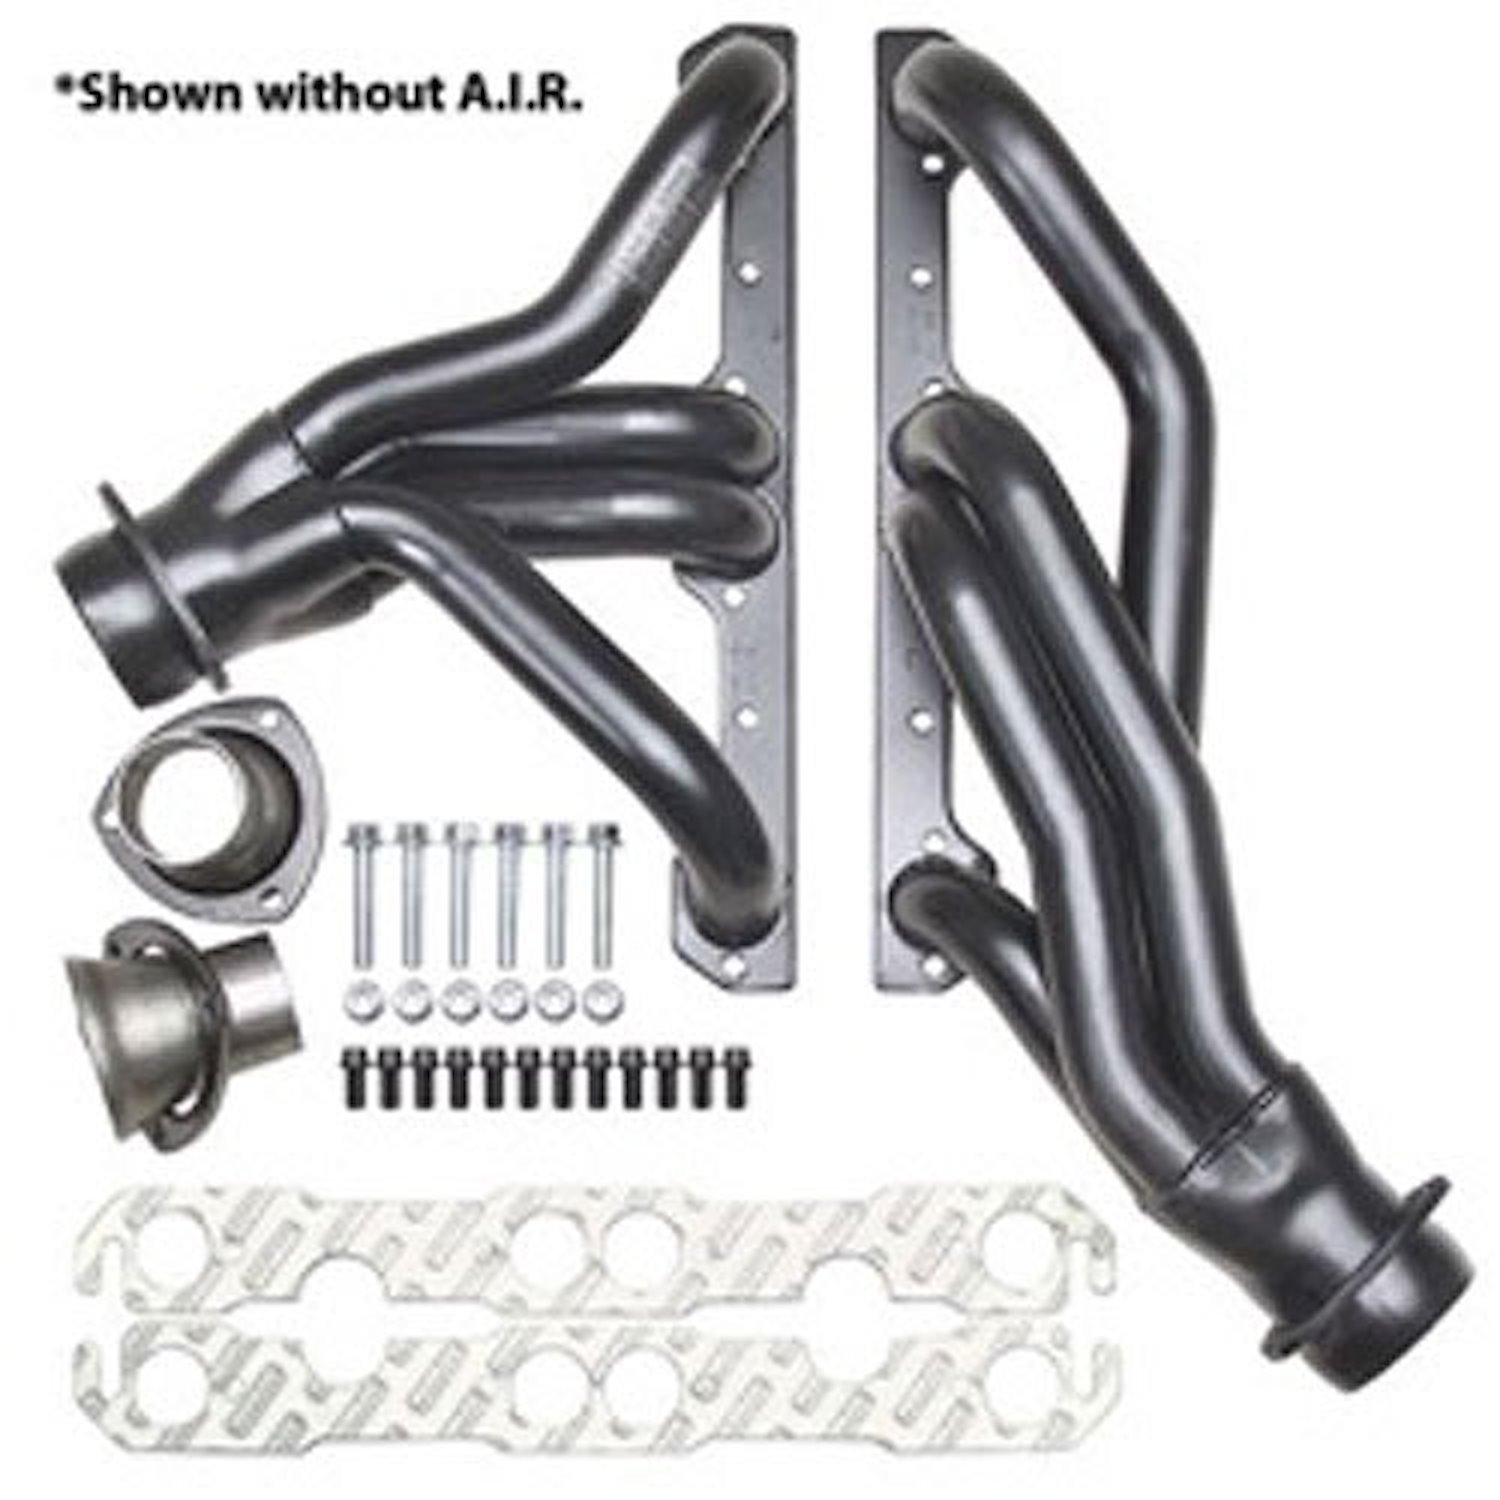 Standard Duty Uncoated Shorty Headers for 1967-87 Camaro,